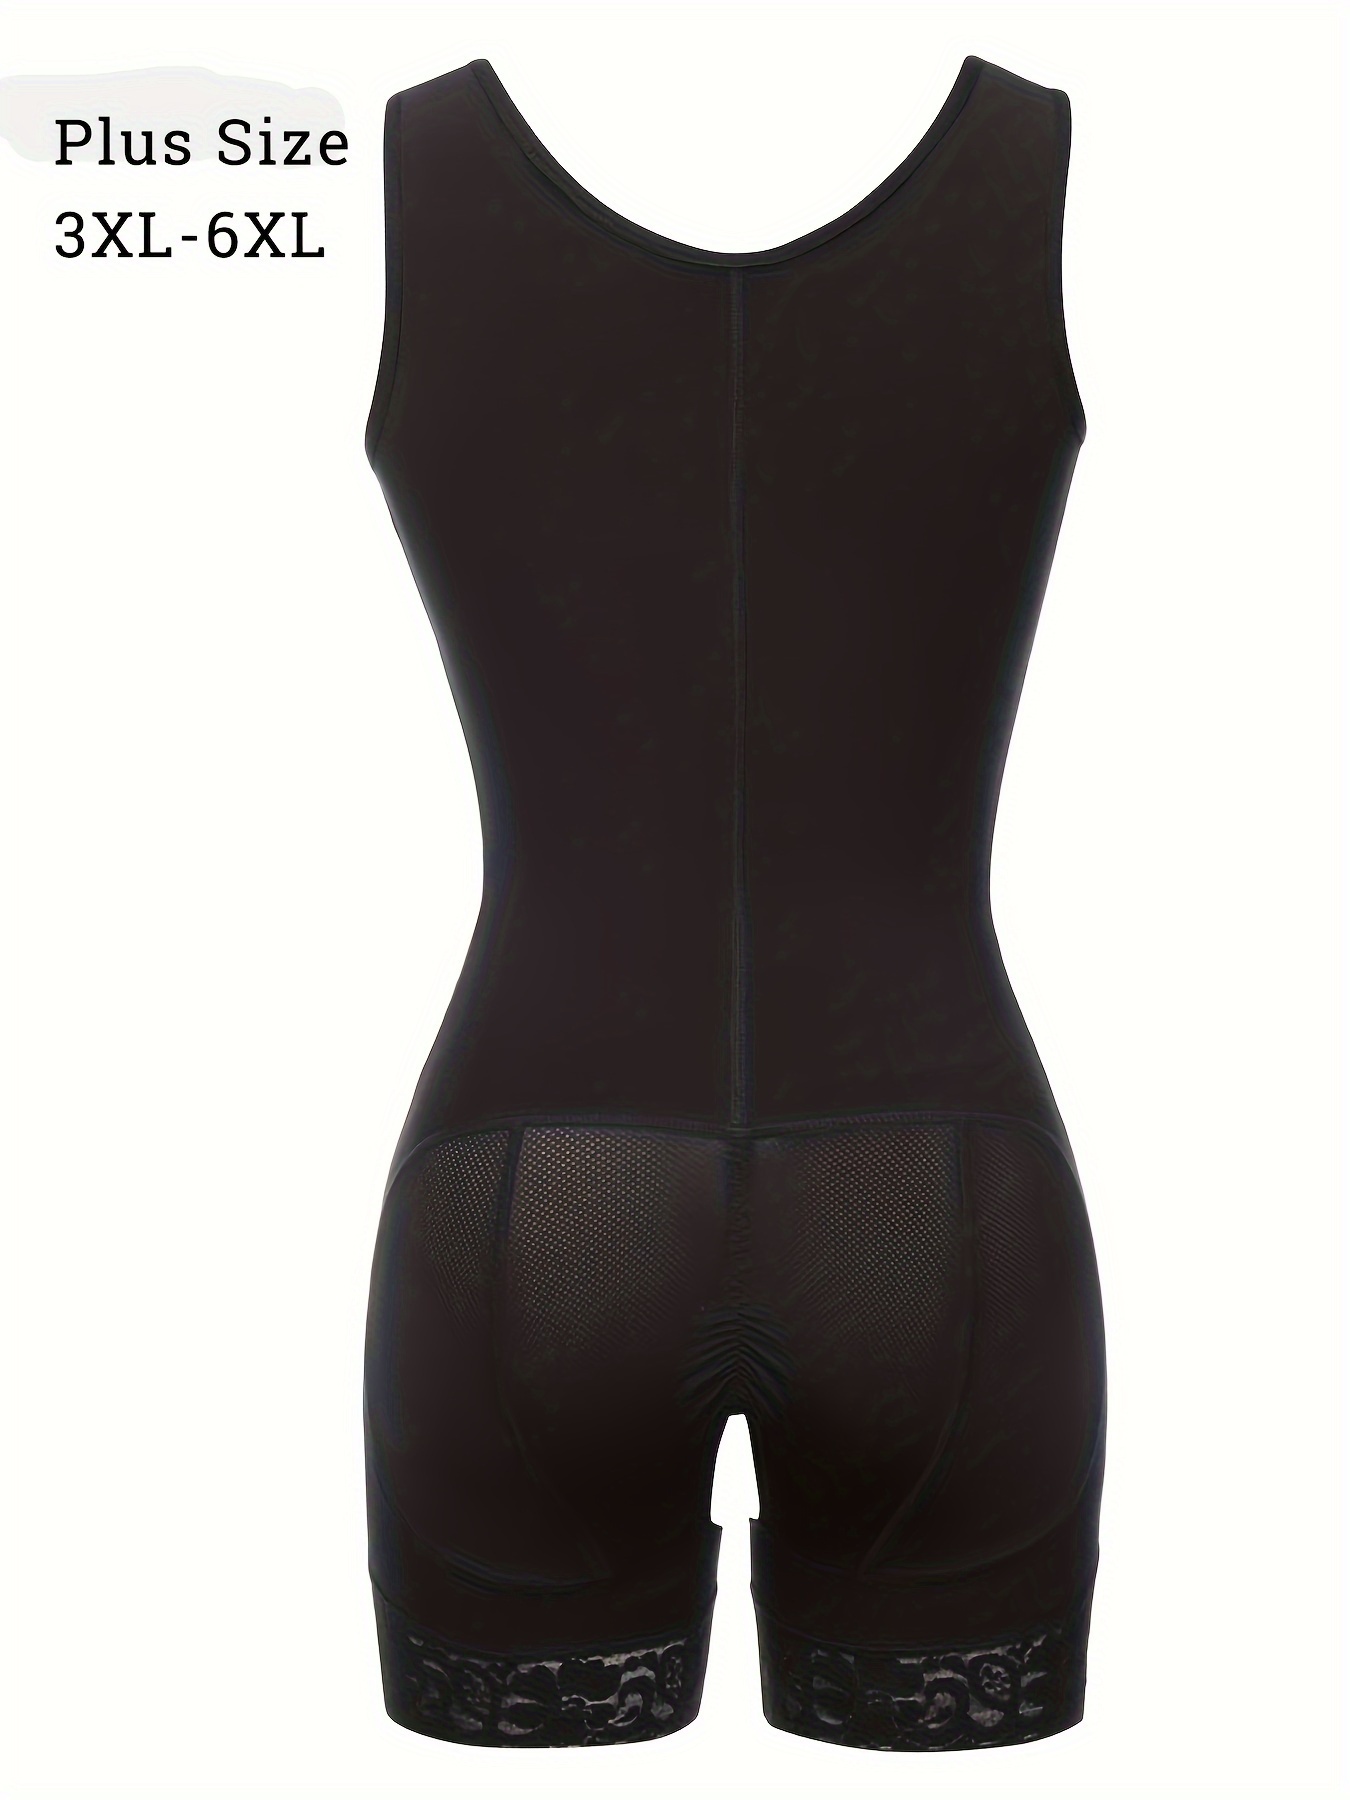 A BodyShaper you won't regret! If anything you will fall in love